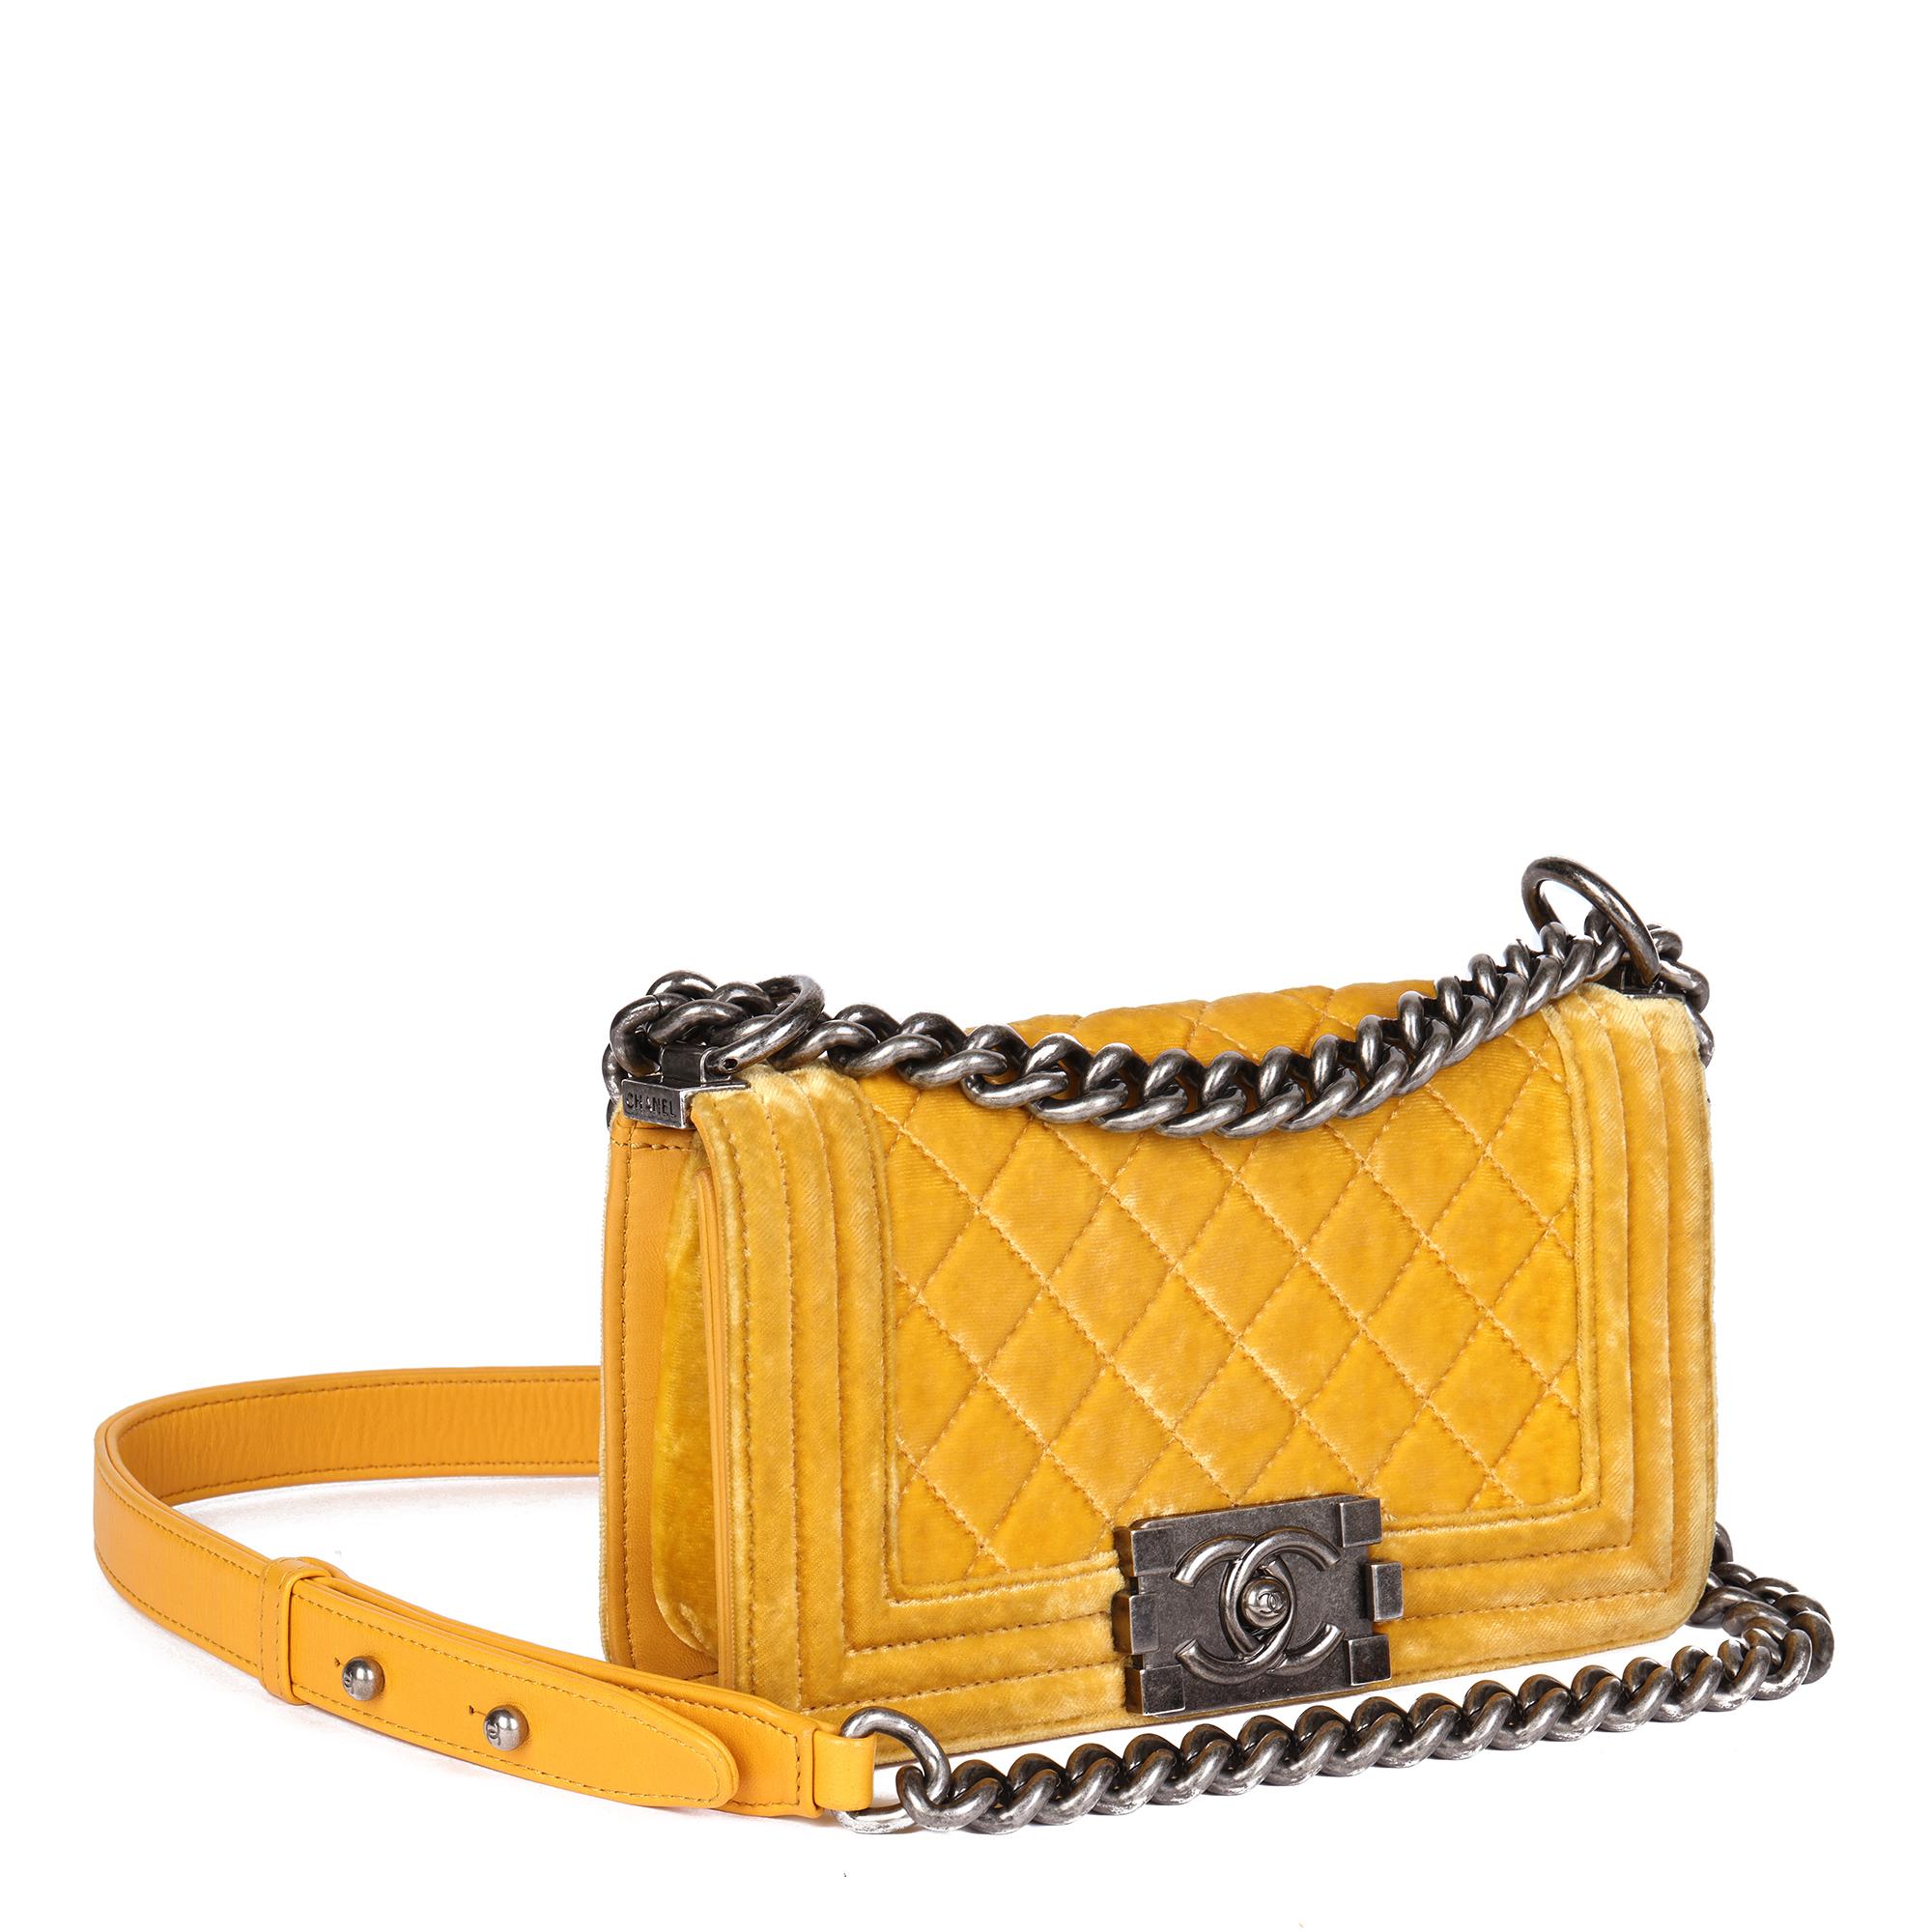 CHANEL
Yellow Quilted Velvet Small Le Boy

Xupes Reference: CB763
Serial Number: 17118009
Age (Circa): 2012
Accompanied By: Chanel Dust Bag
Authenticity Details: Authenticity Card, Serial Sticker (Made in Italy)
Gender: Ladies
Type: Shoulder,